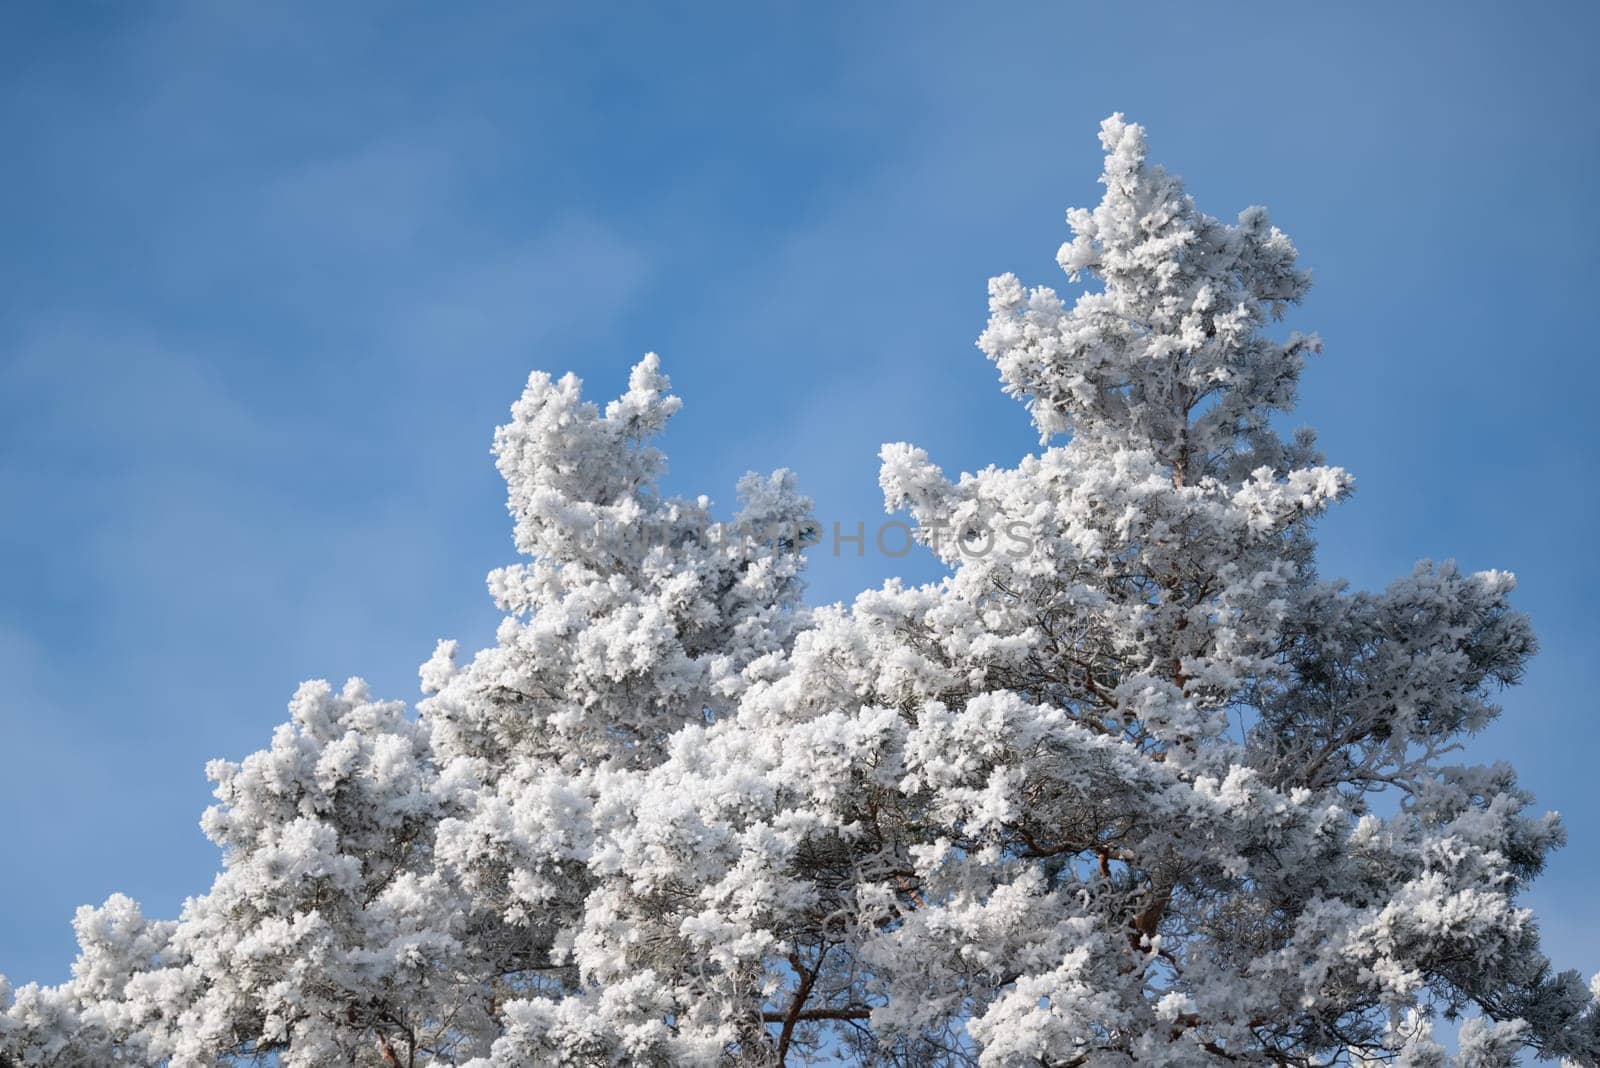 Tops of pine trees in heavy snow and frost in sunny frosty winter morning by VitaliiPetrushenko